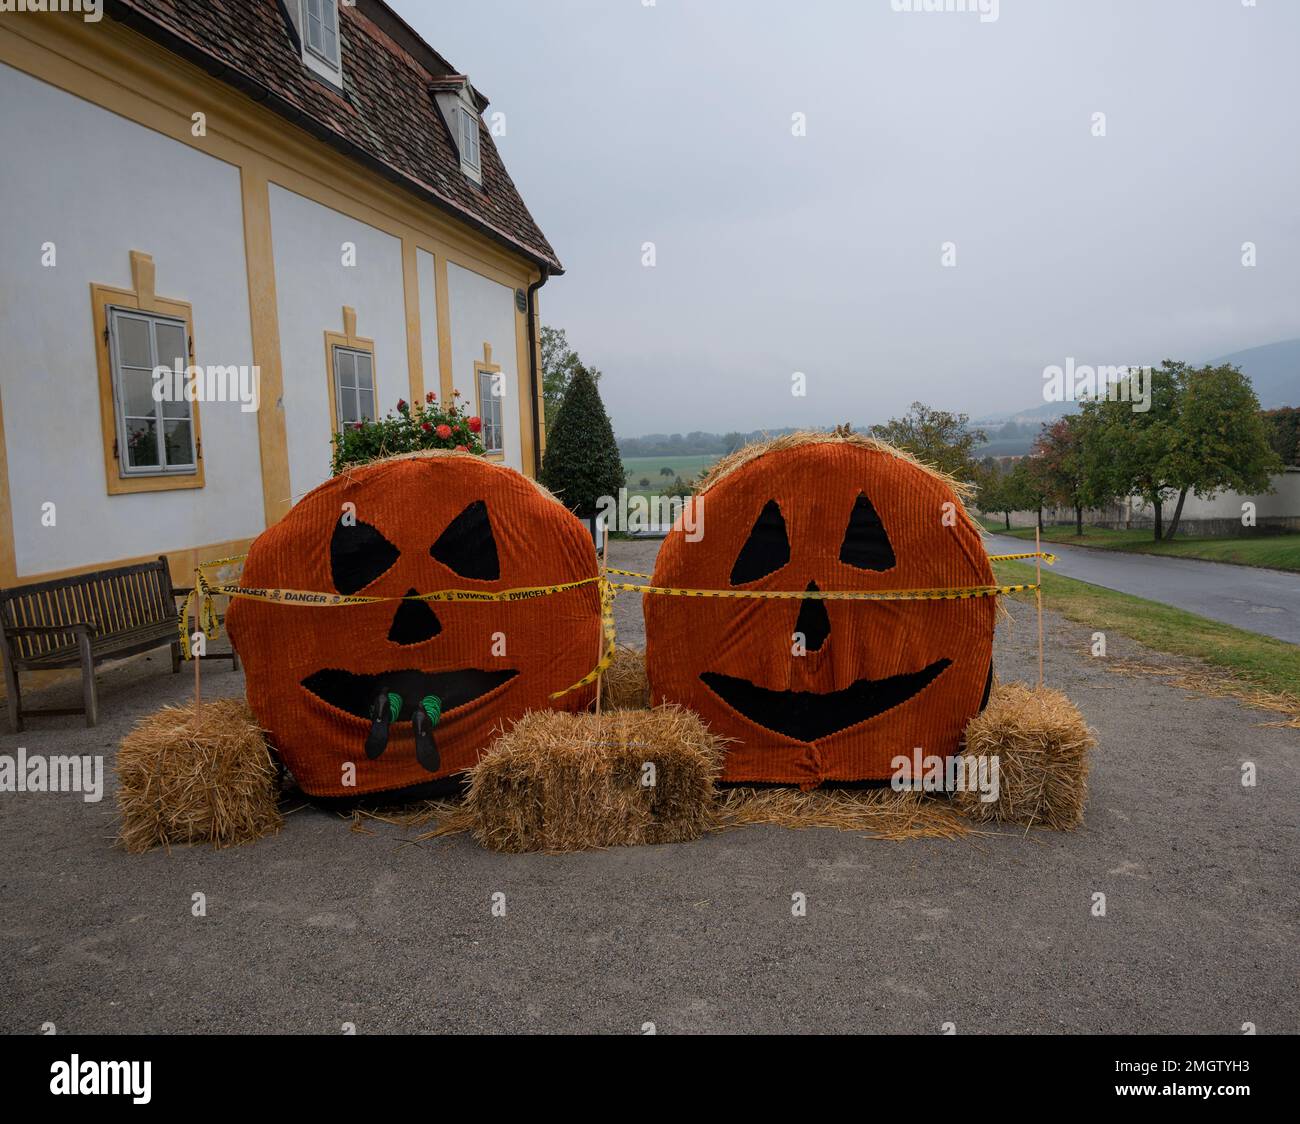 Halloween celebration pumpkins on display in the estate farm at the castle schloss Hof in Lower Austria established by Prince Eugene of Savoy Stock Photo